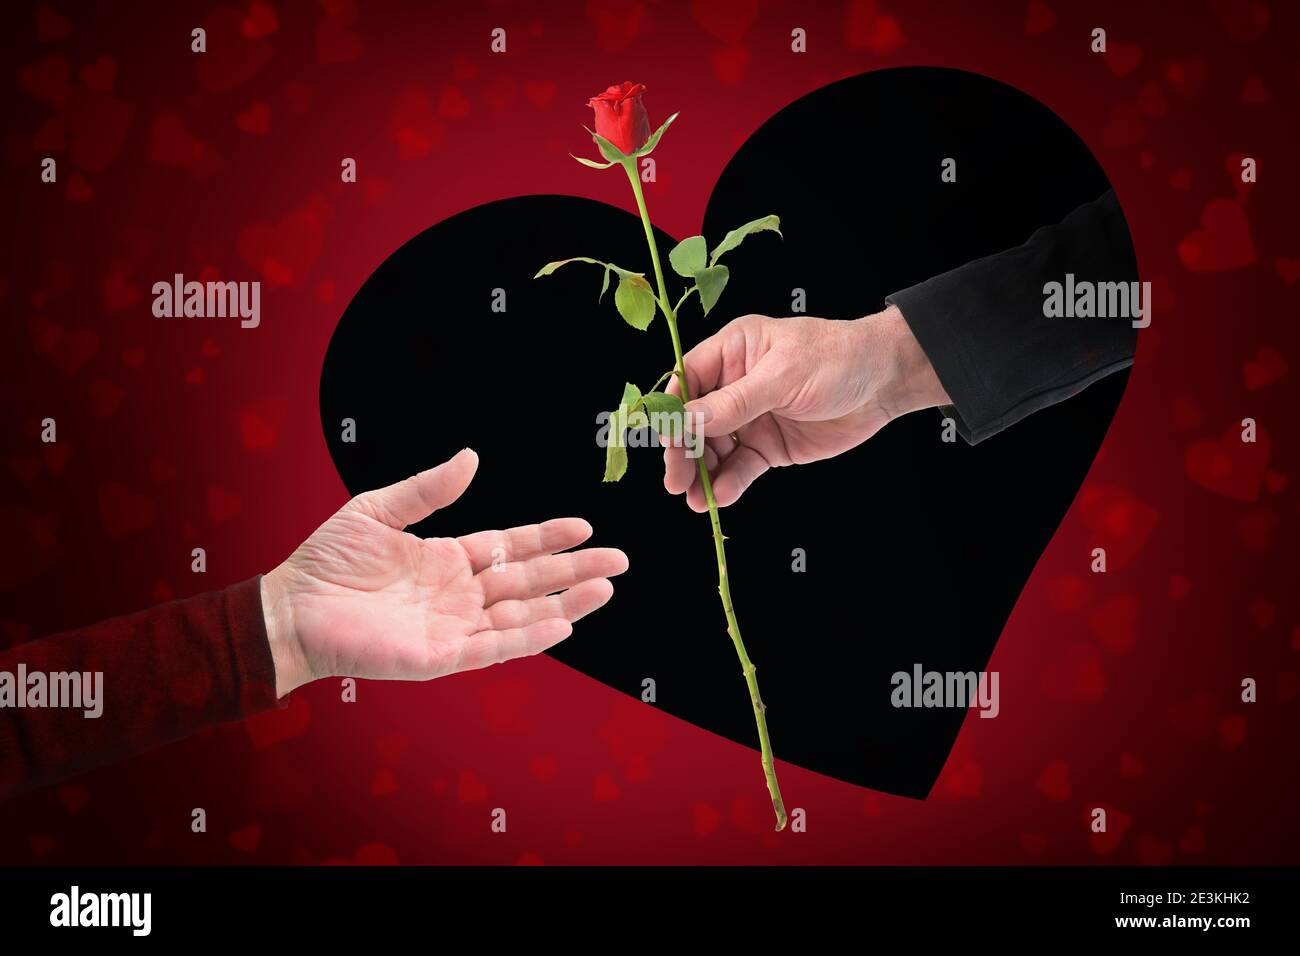 Hand of a man is giving a rose through a heart shaped black hole in a red greeting card to the hand of a woman on Valentines day, love concept Stock Photo